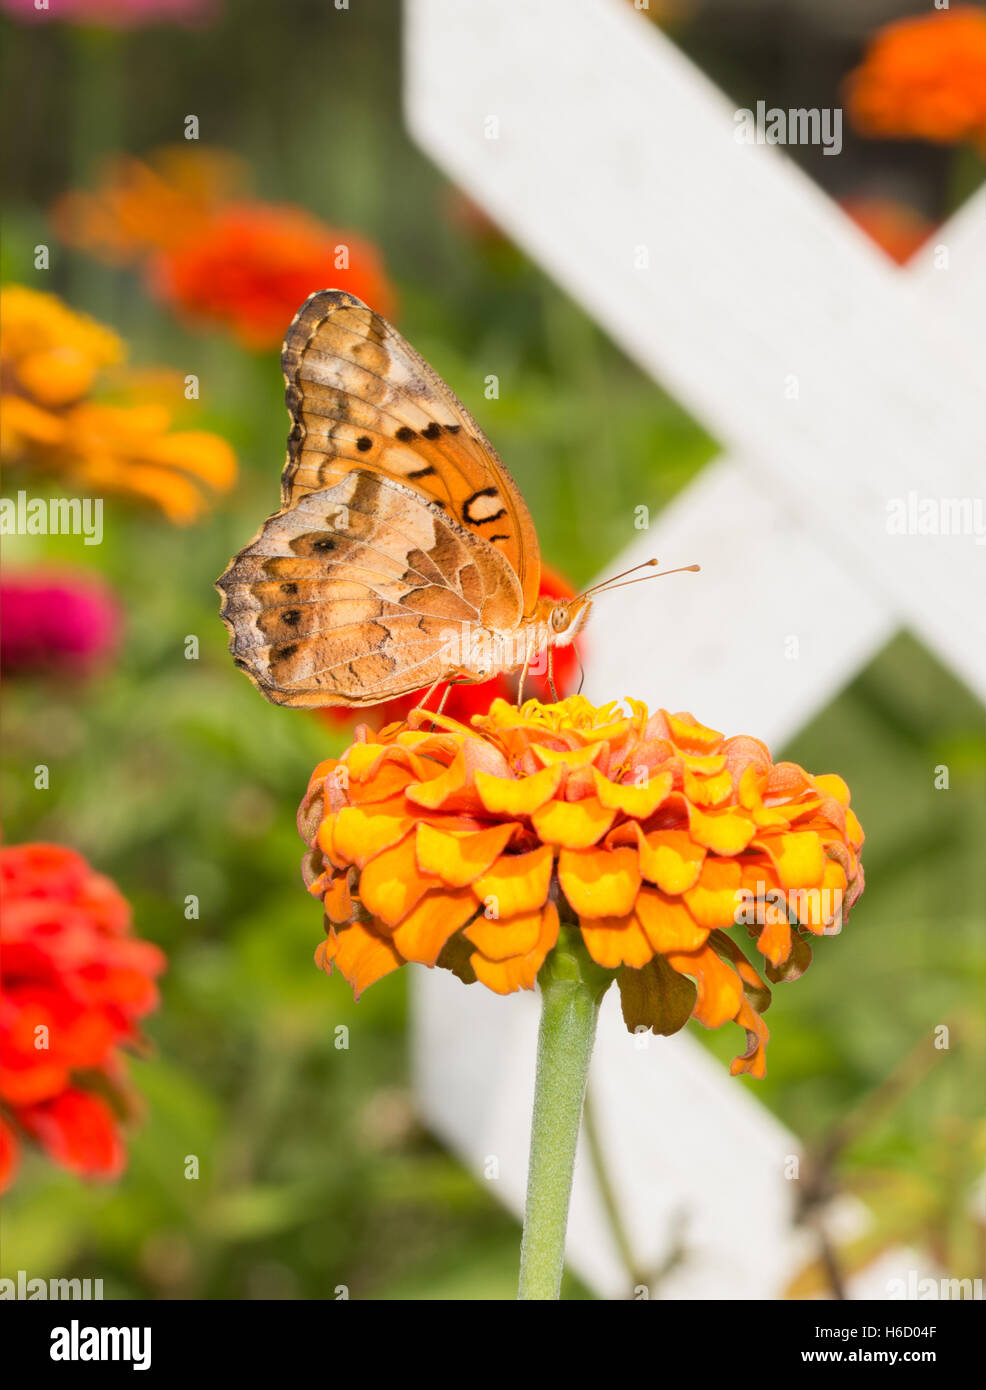 Ventral view of a Variegated Fritillary butterfly feeding on a flower in summer garden Stock Photo